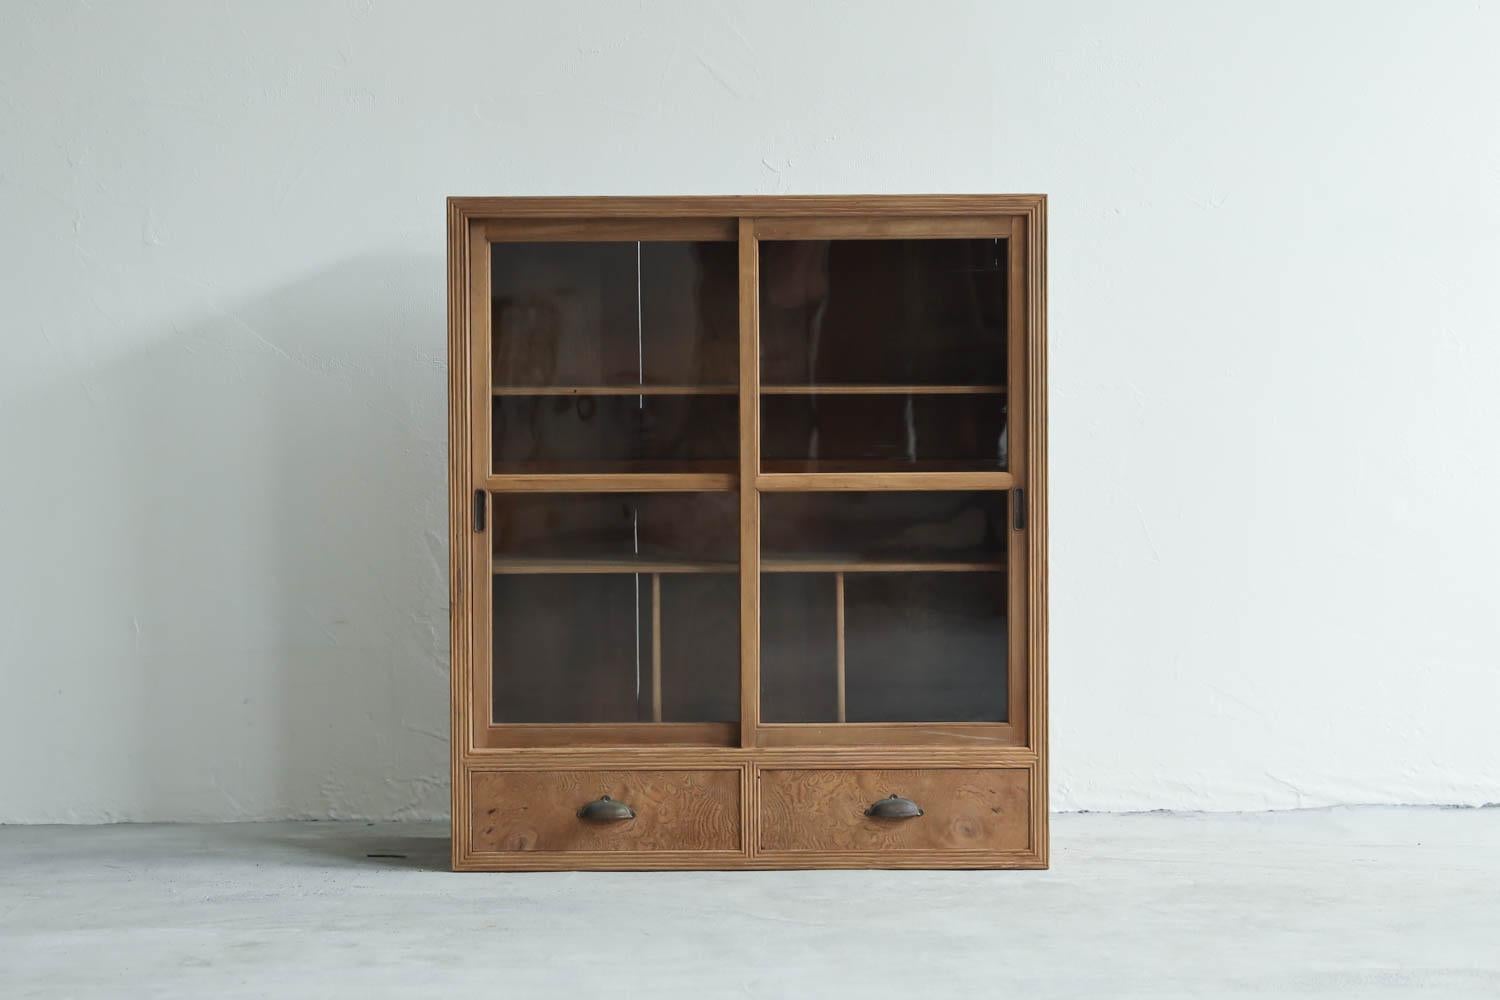 This is a modernized piece of Japanese antique furniture produced in the Taisho period (1912-1926 CE) .

This furniture is made by applying traditional techniques used in Japanese shrines.

This furniture has a joining technique called 